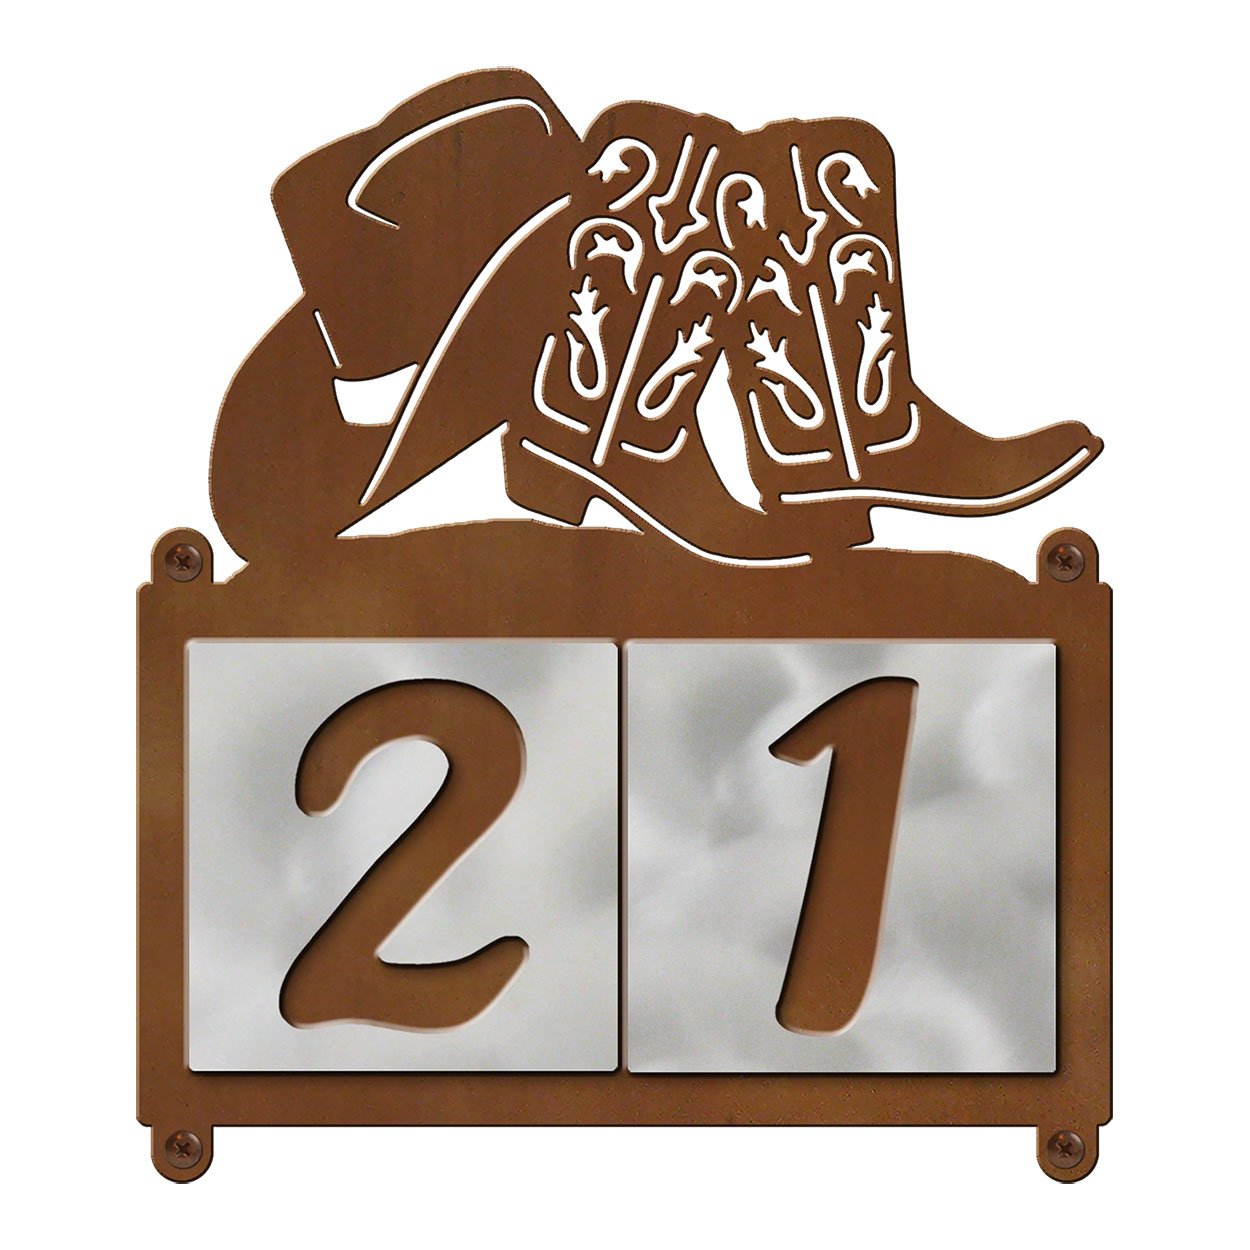 607032 - Hat and Boots 2-Digit Horizontal 4in Tile House Numbers